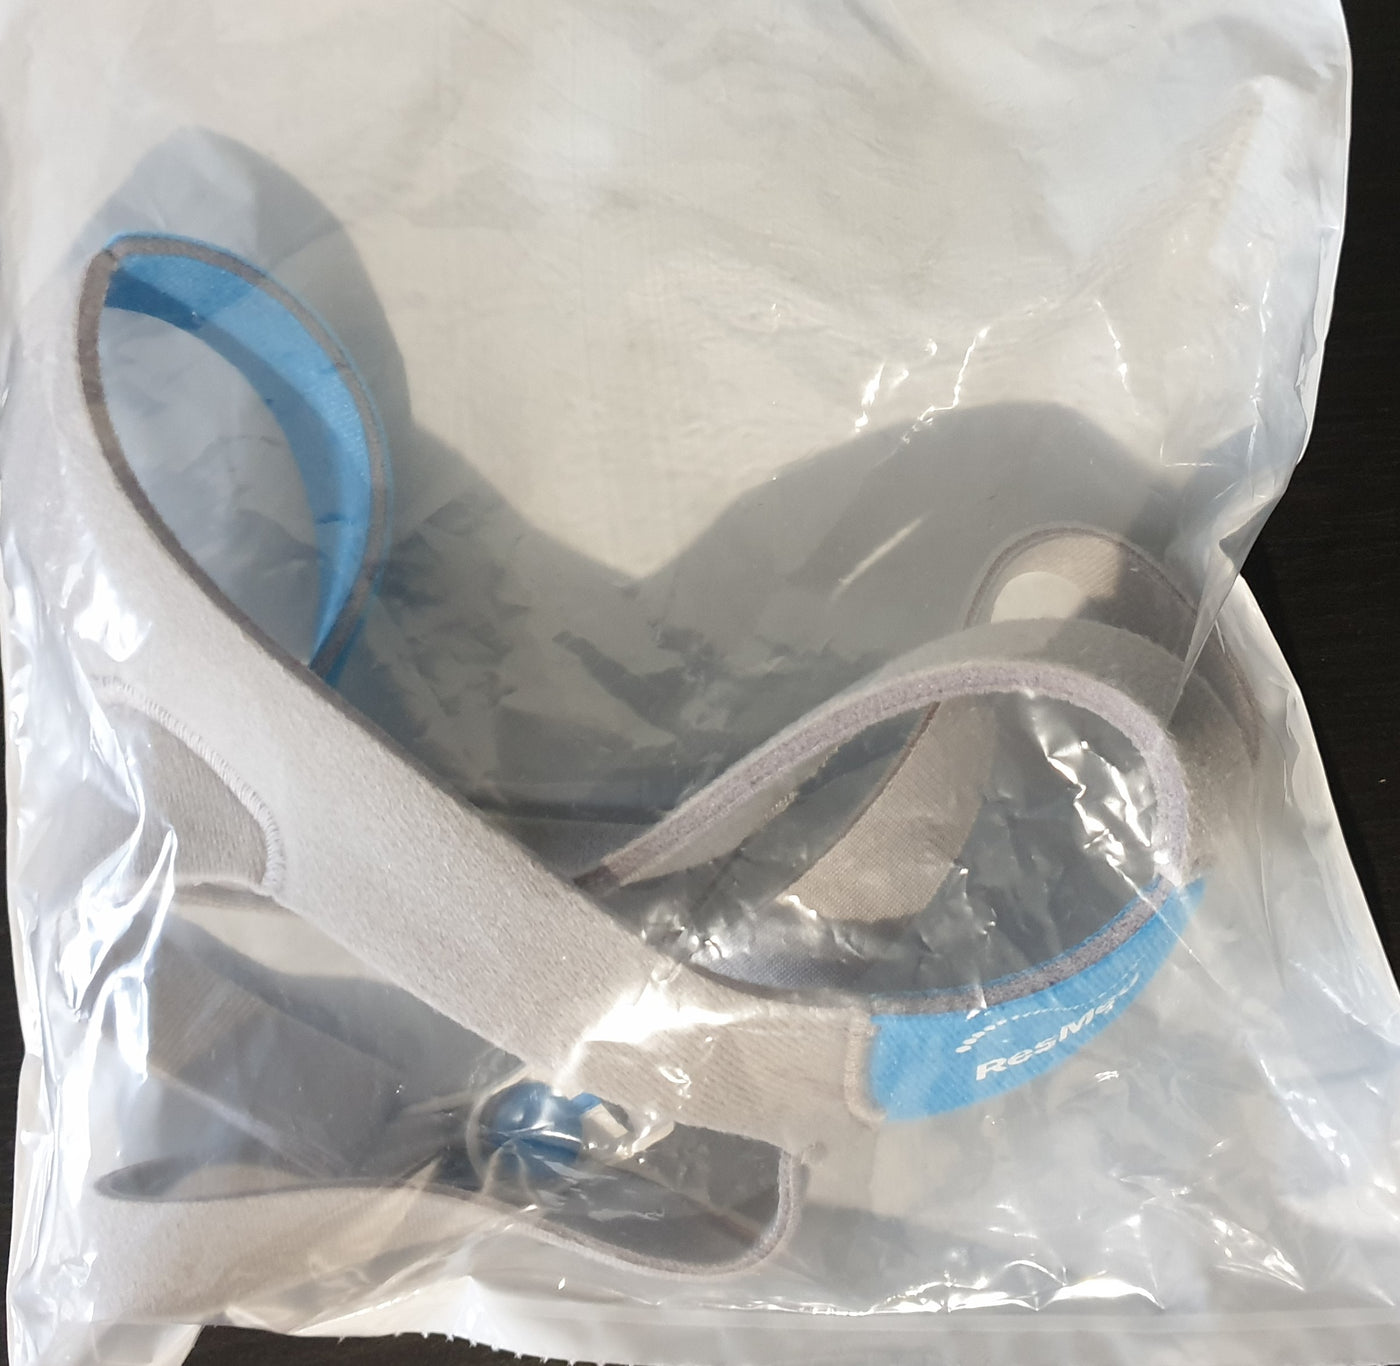 Headgear / Strap for Him / Her Resmed AirFit / AirTouch N20 CPAP mask